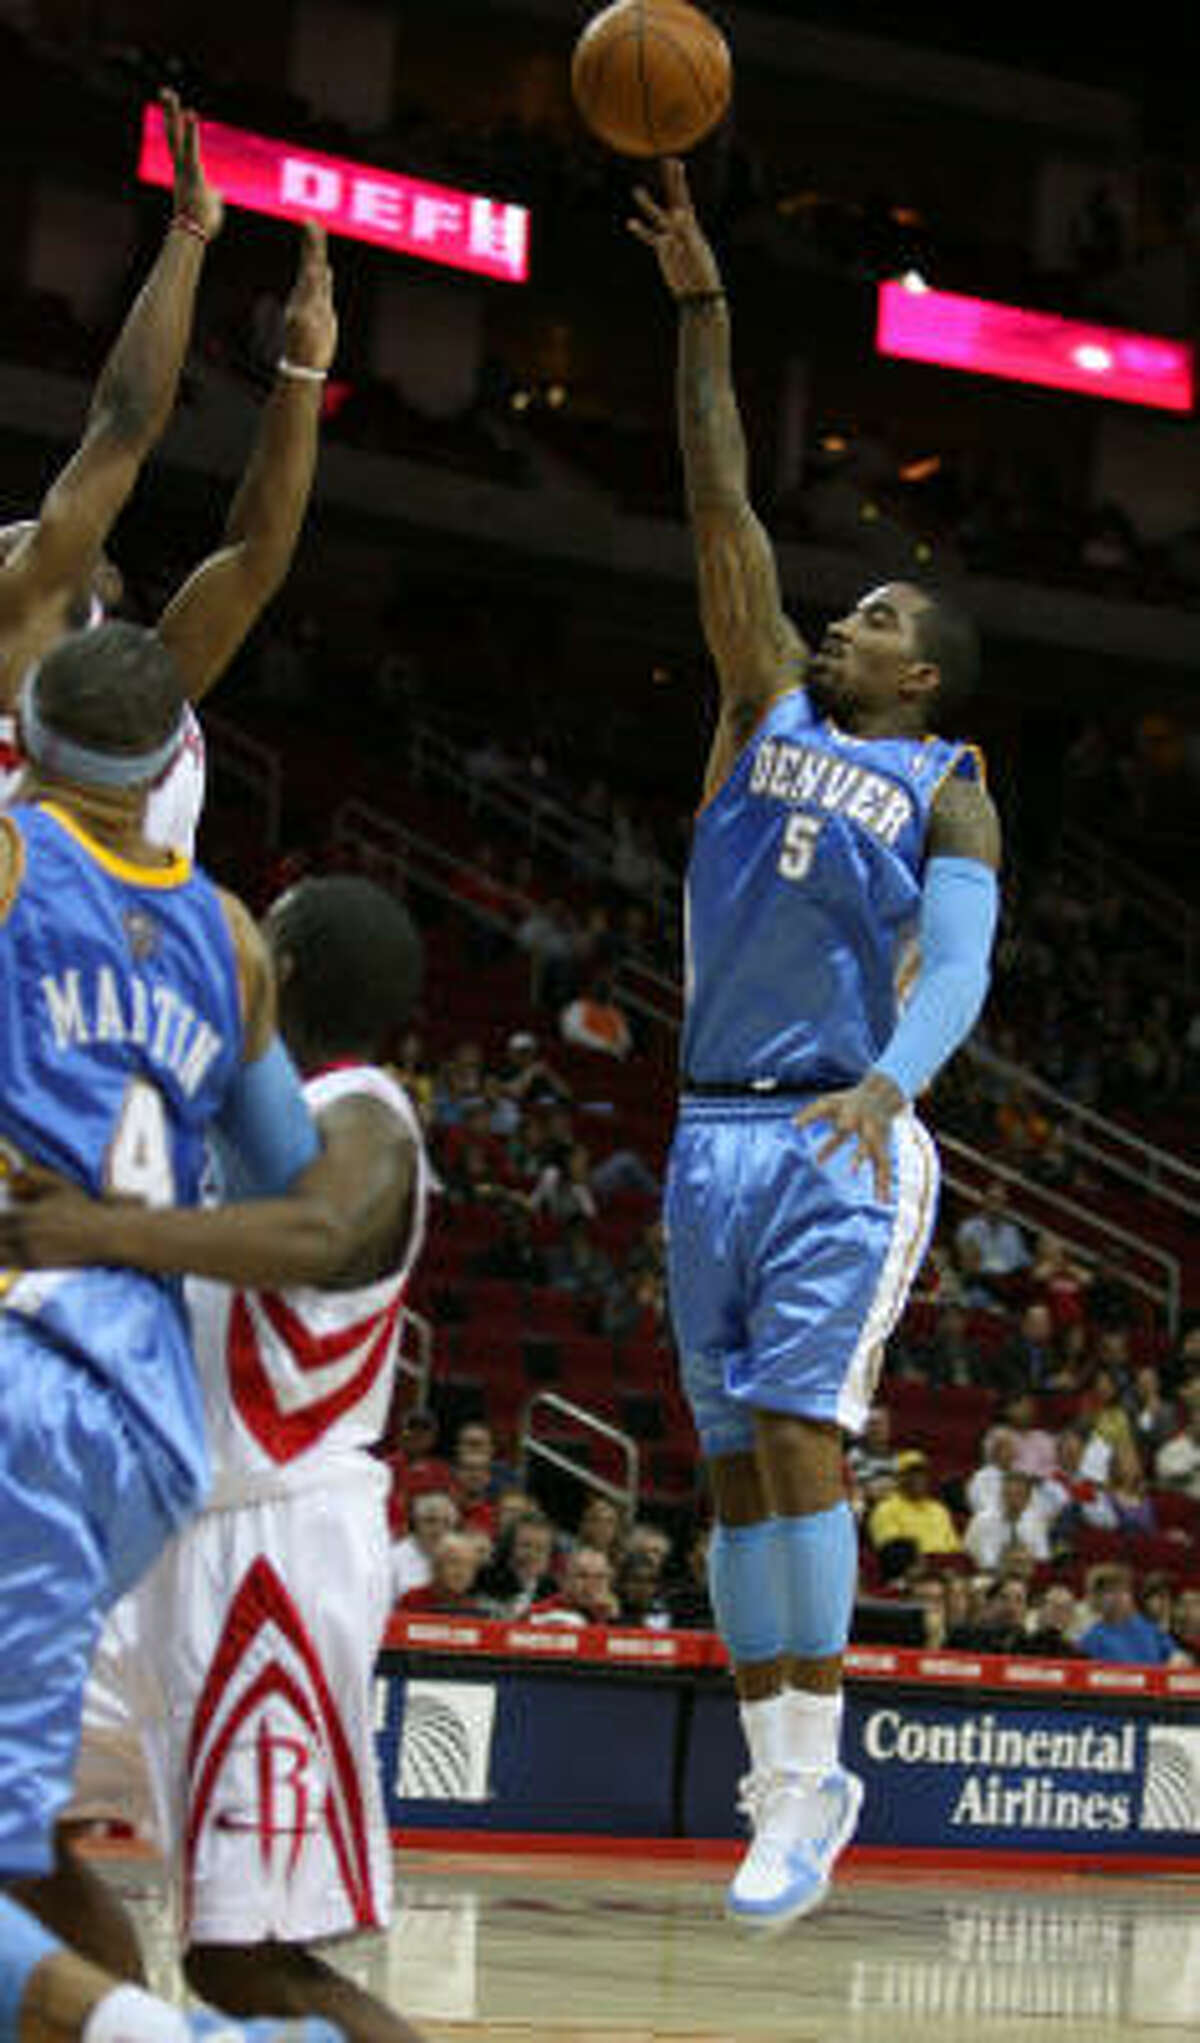 Nuggets guard J.R. Smith sends a shot over the Rockets' defense.